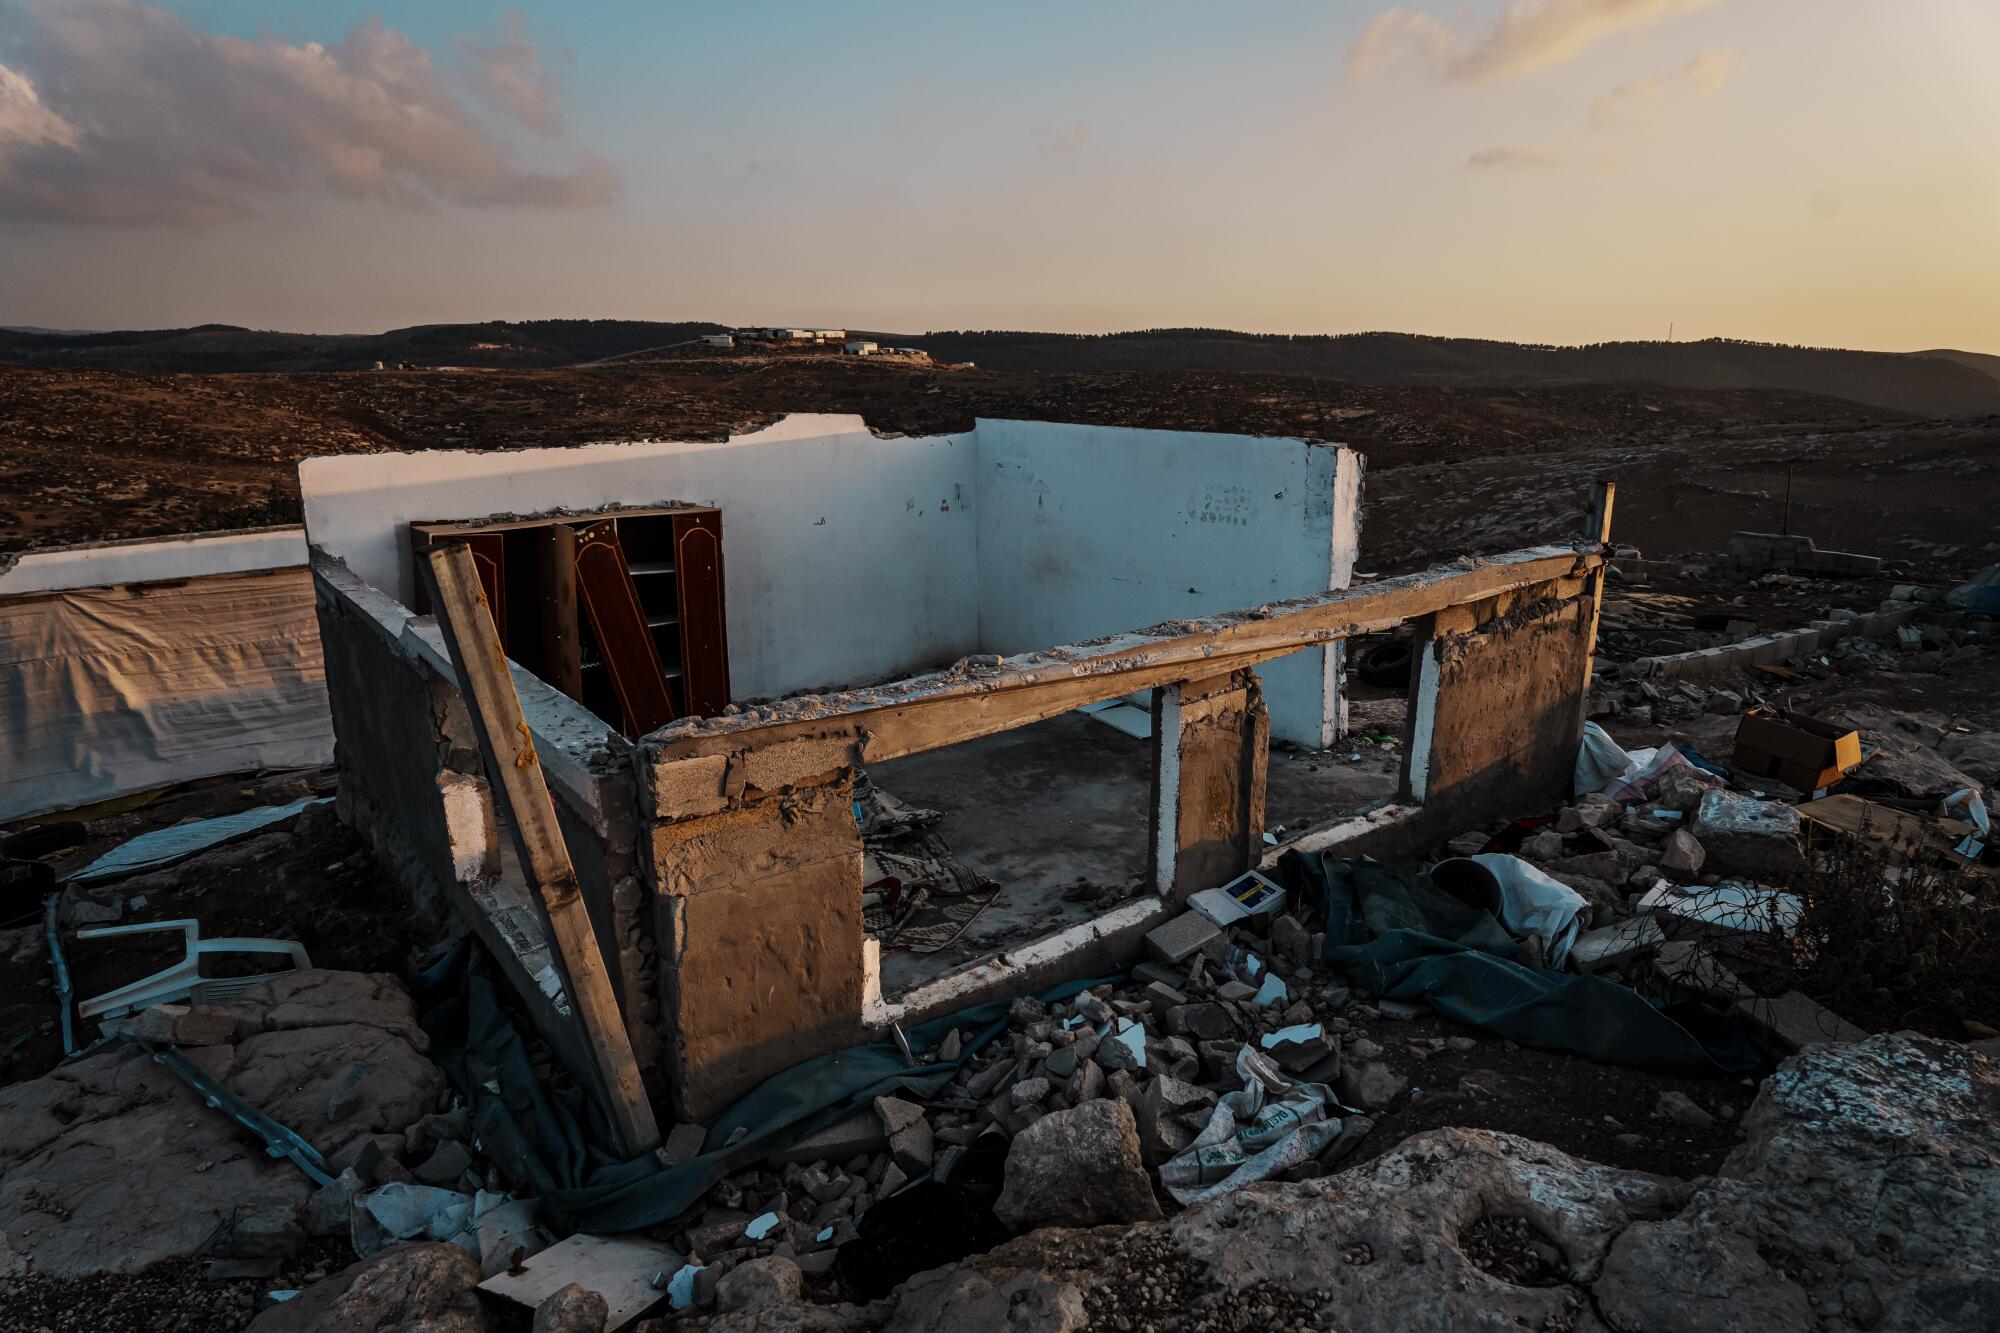 A Palestinian home sits abandoned after its inhabitants left due to instances of Israeli settler violence and harassment